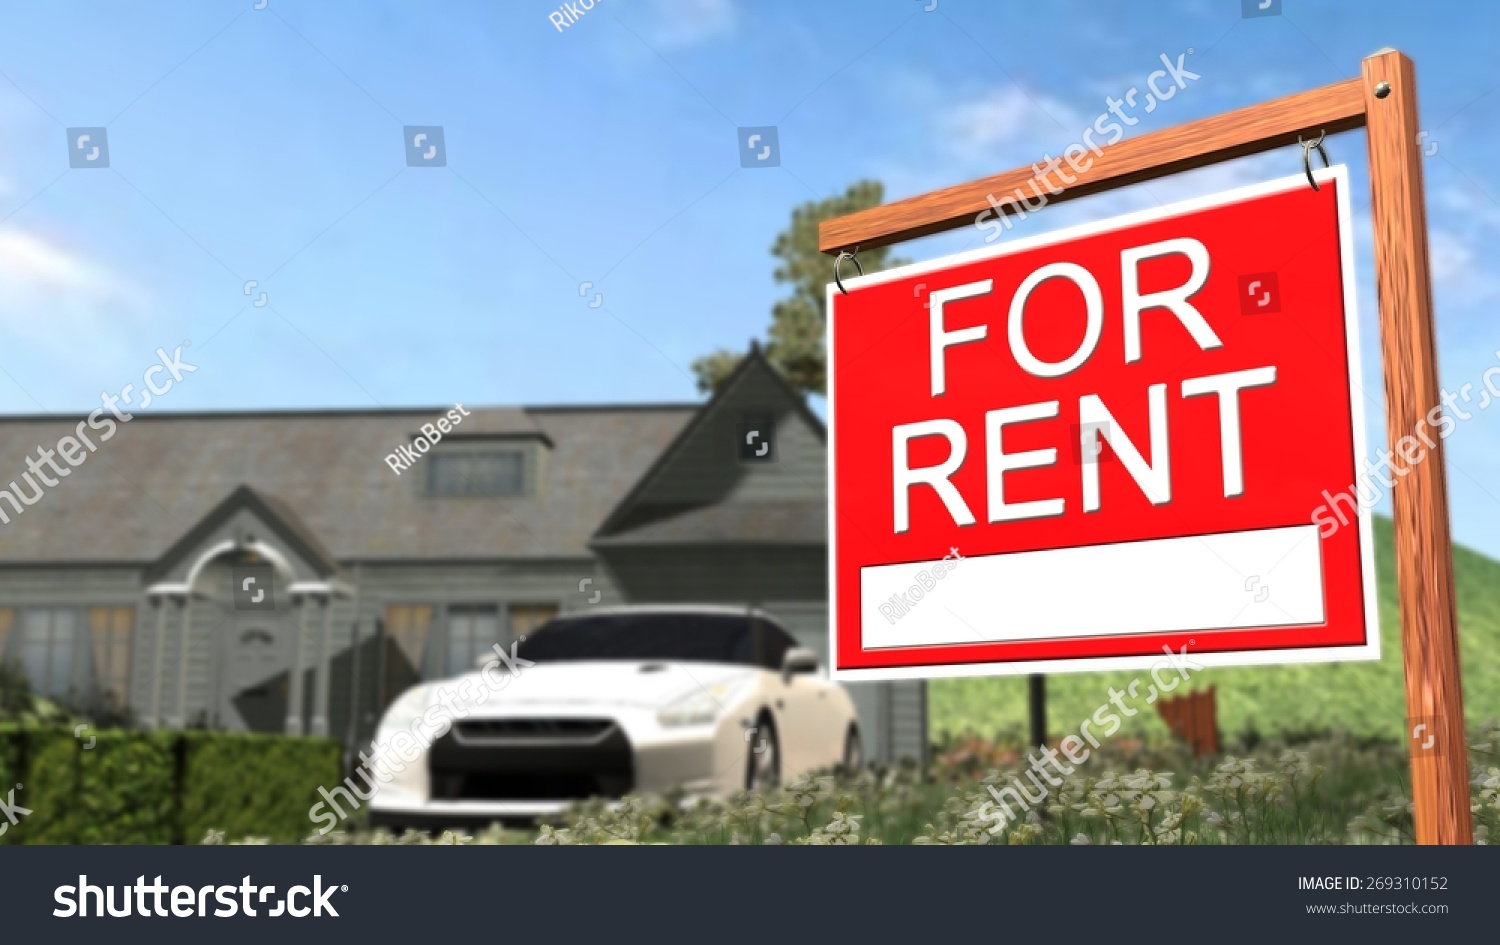 Home For Rent Real Estate Sign in Front of Beautiful New House #269310152